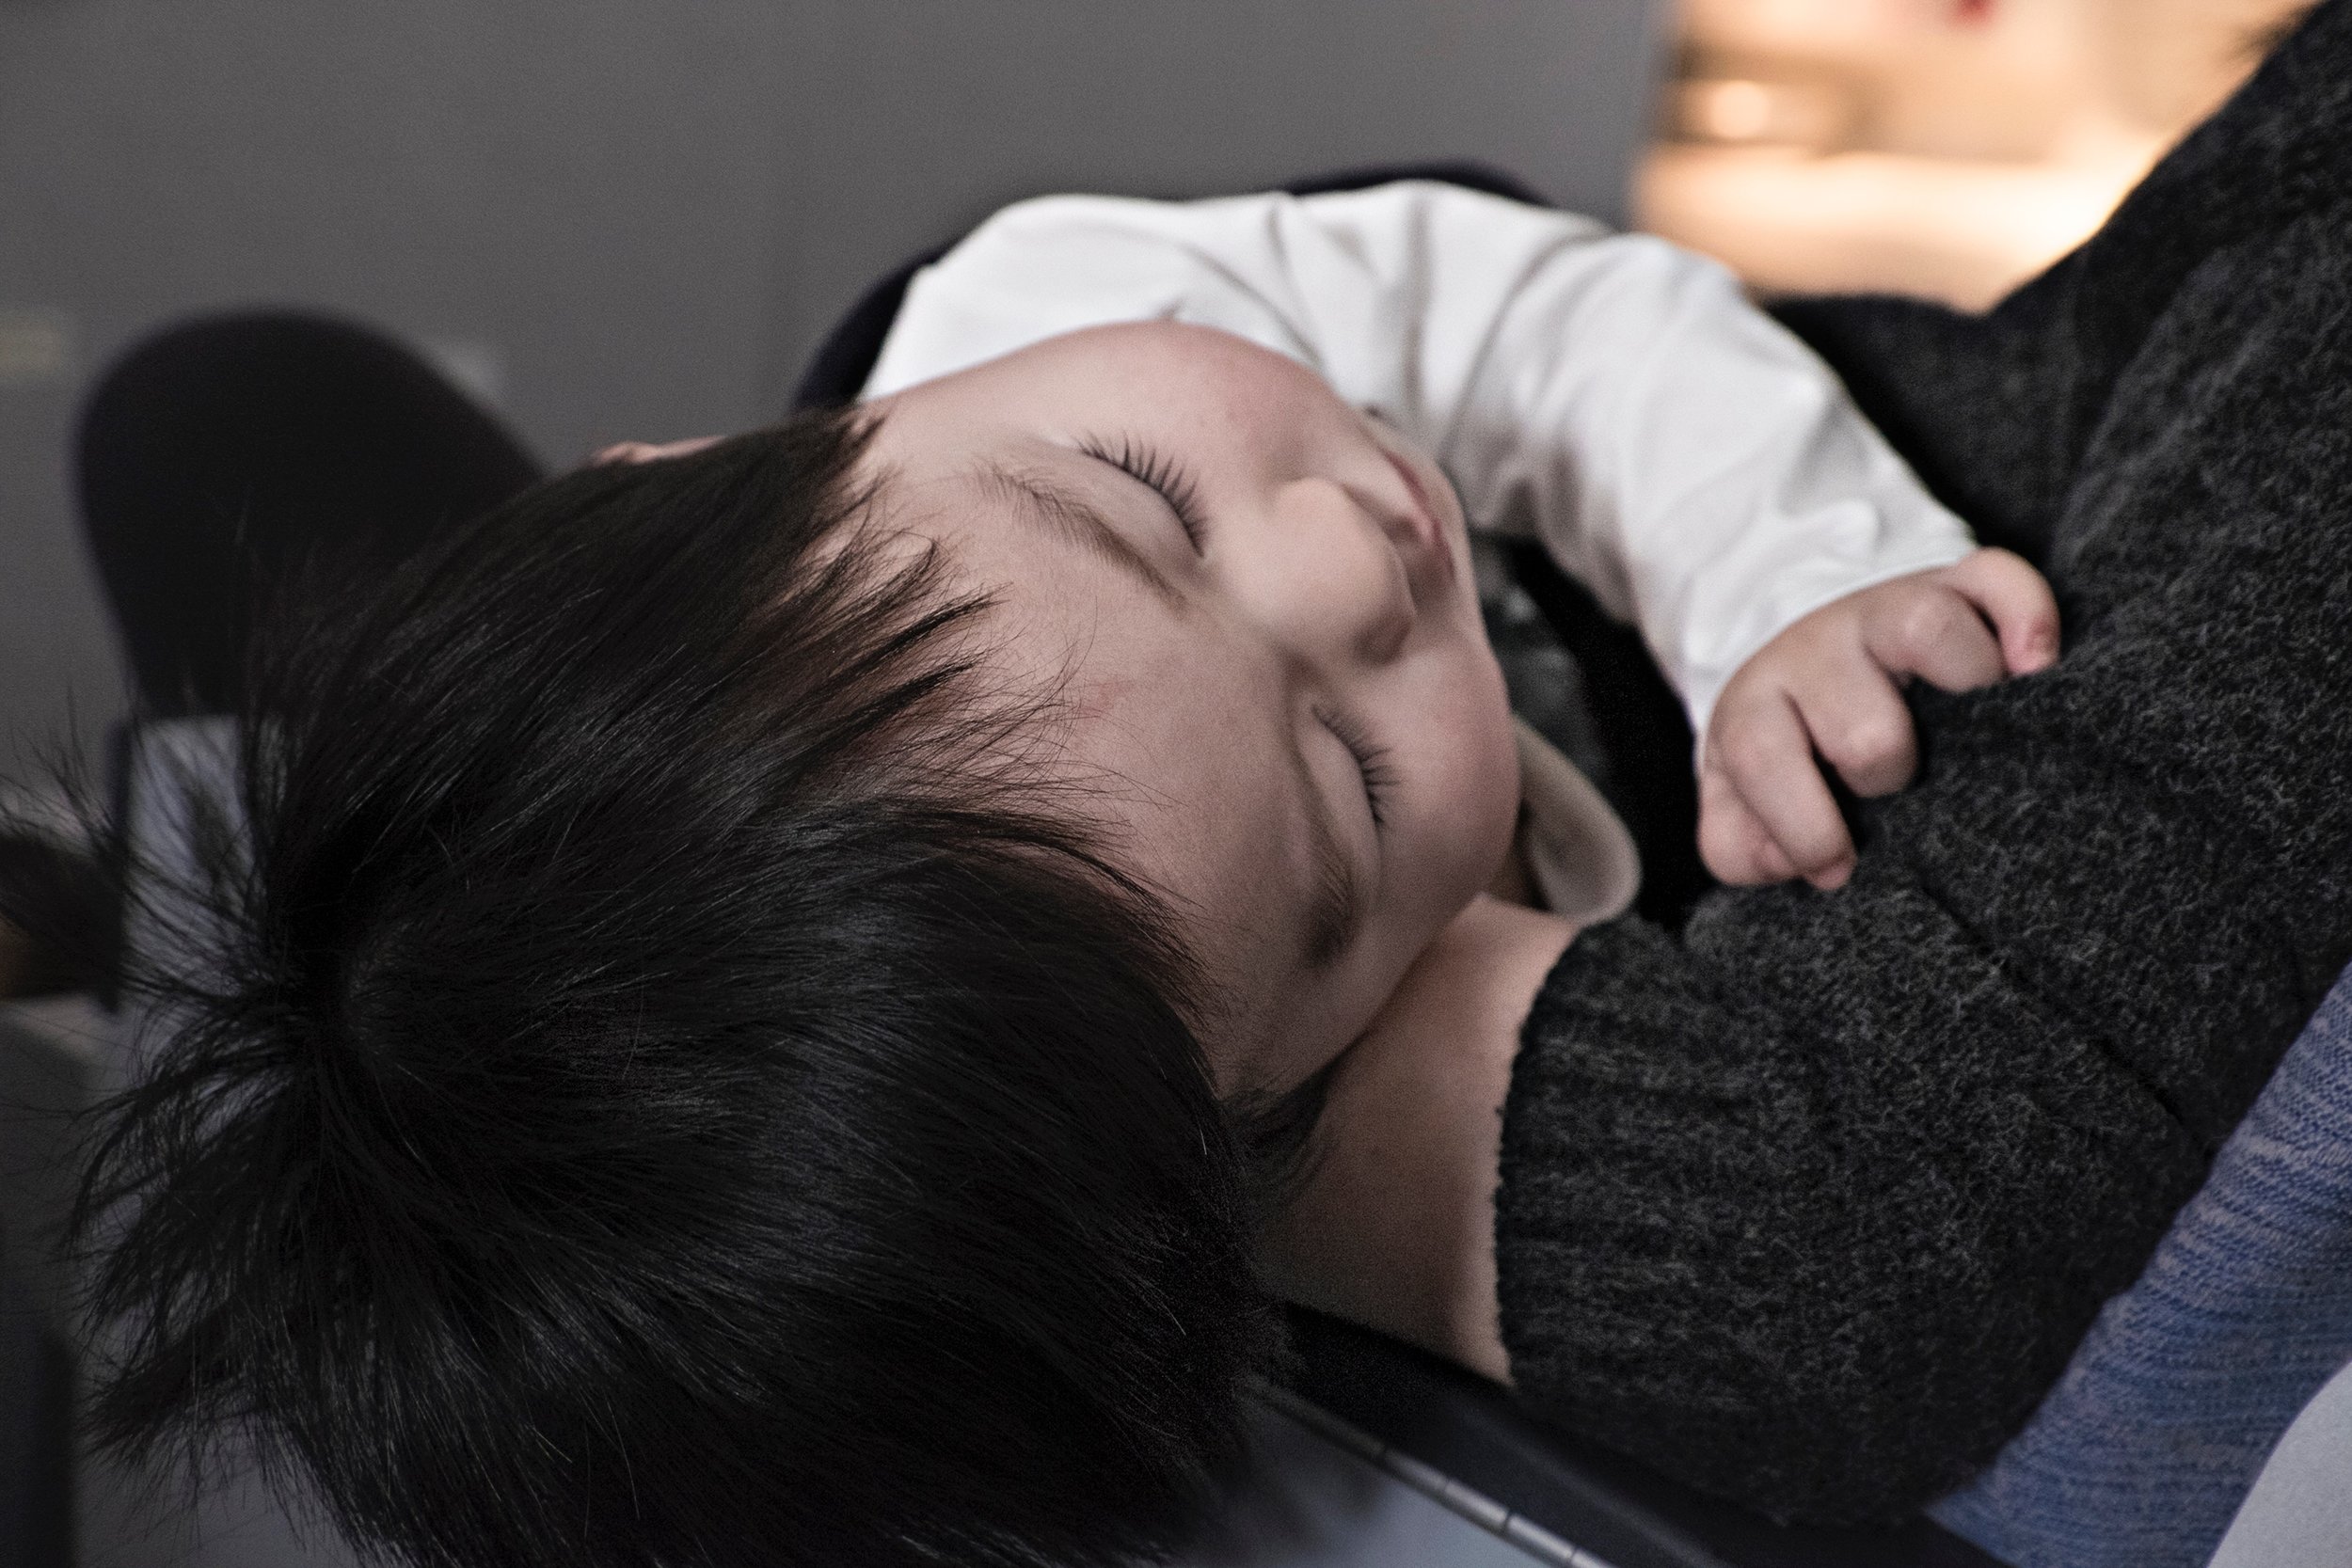 Getting your Zzz’s as a baby: How you learn to sleep depends on your culture